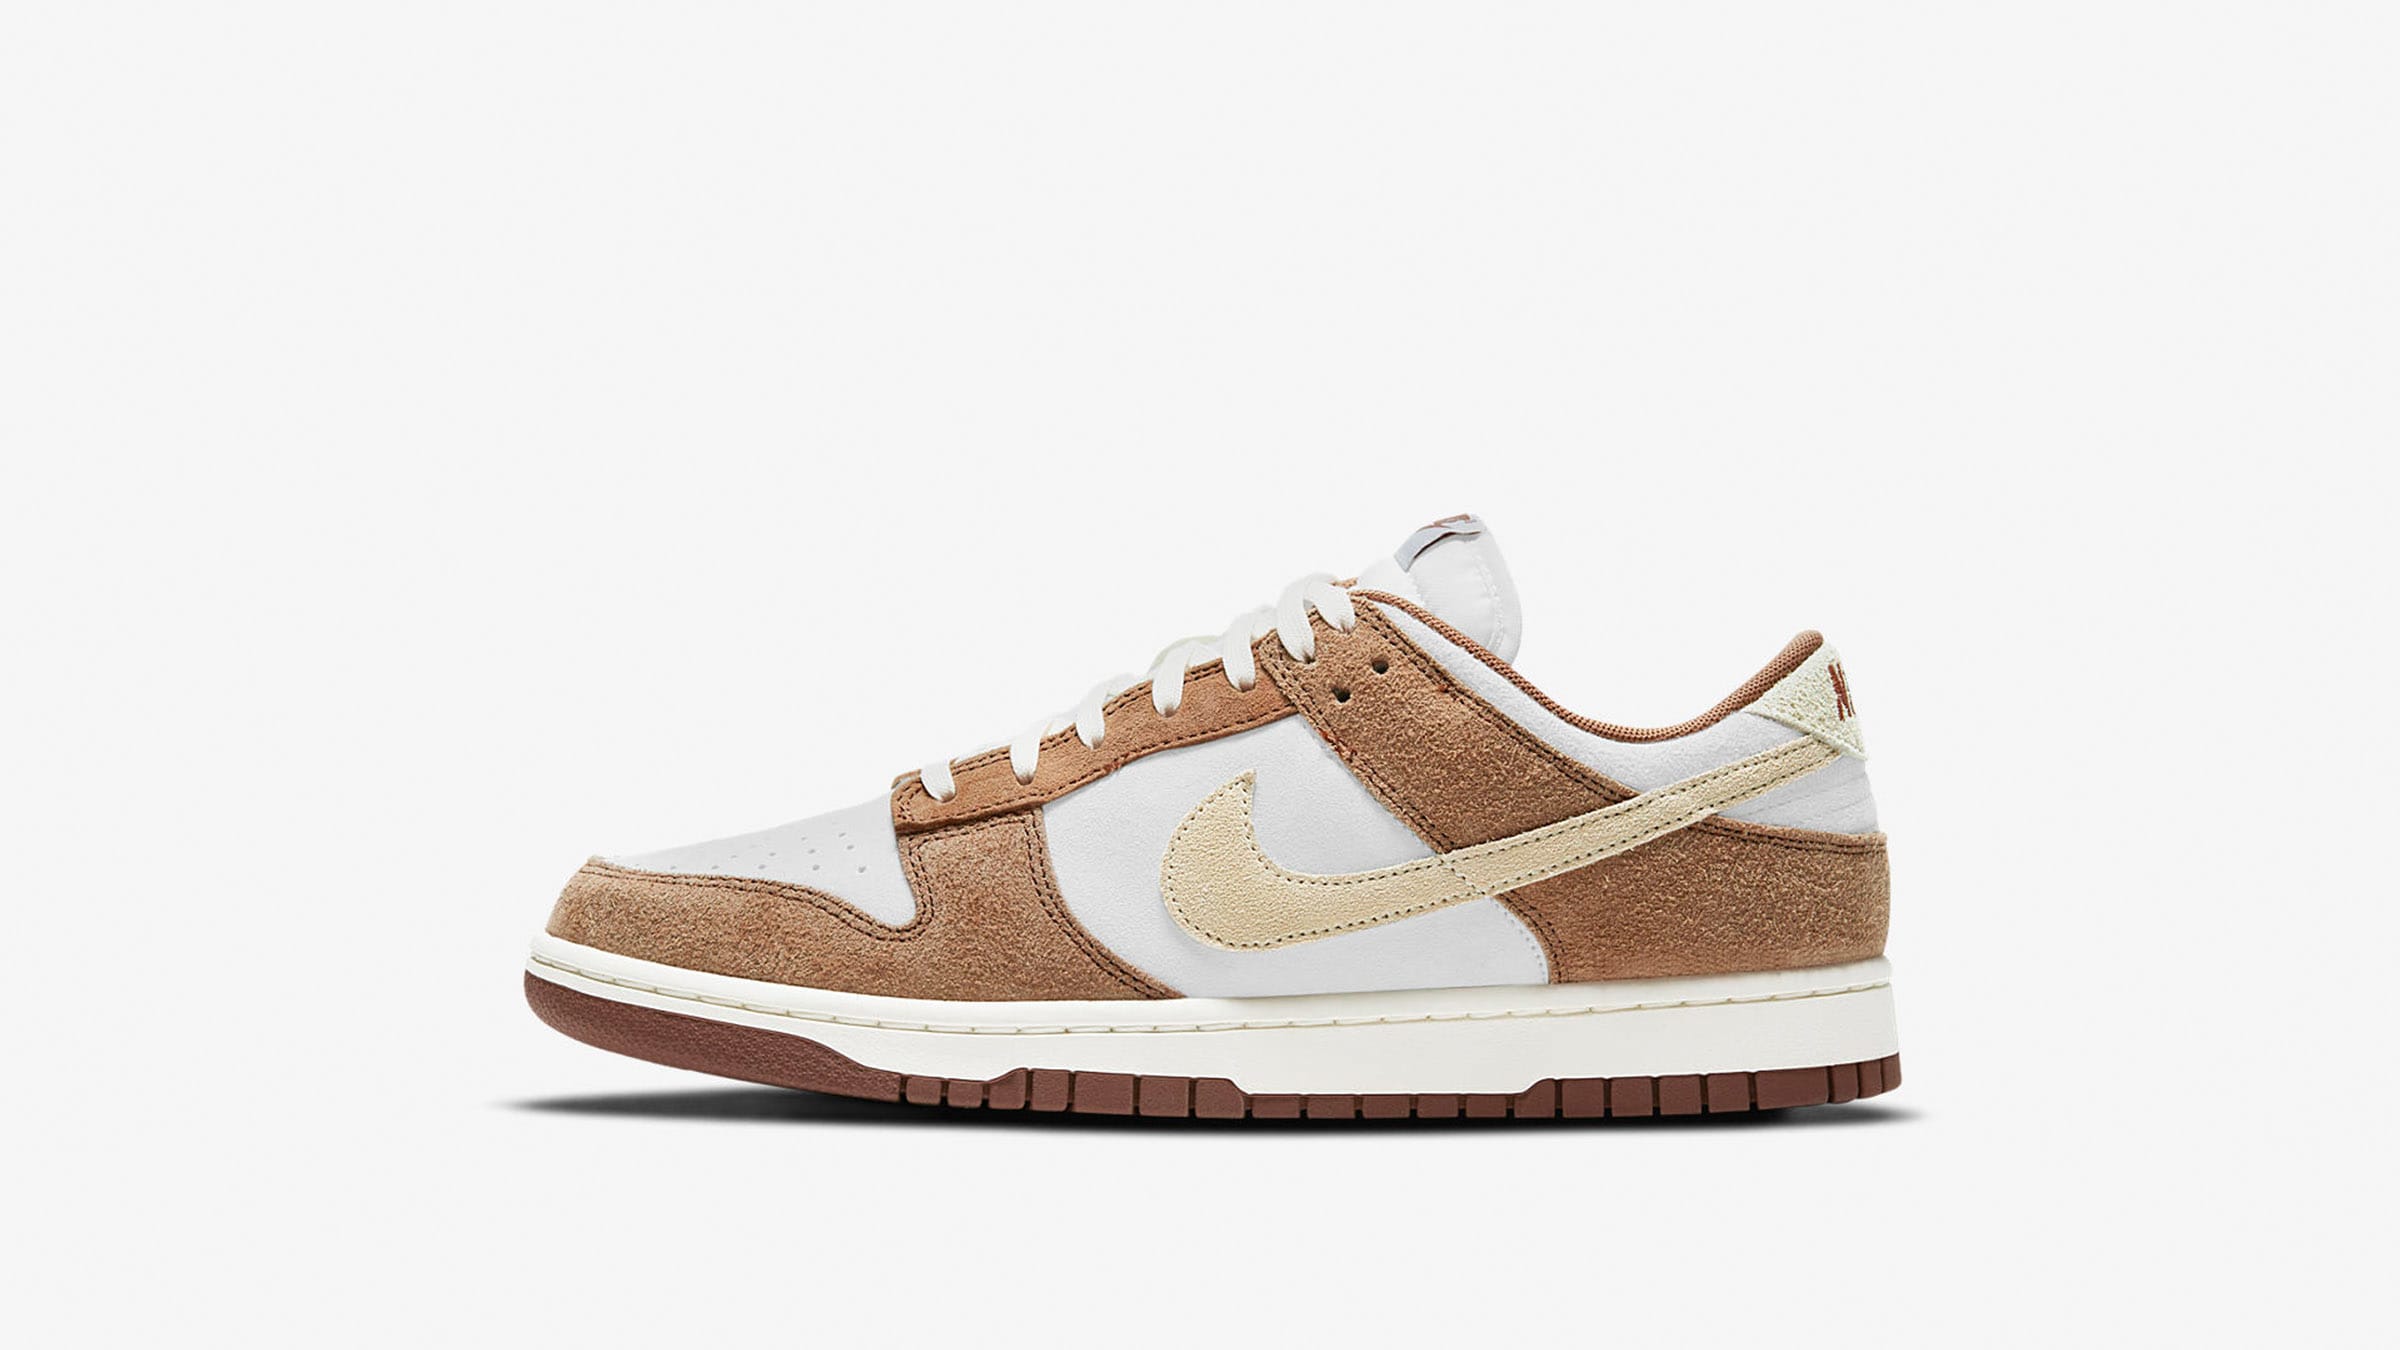 Nike Dunk Low Retro PRM (Sail, Fossil & Medium Curry) | END. Launches